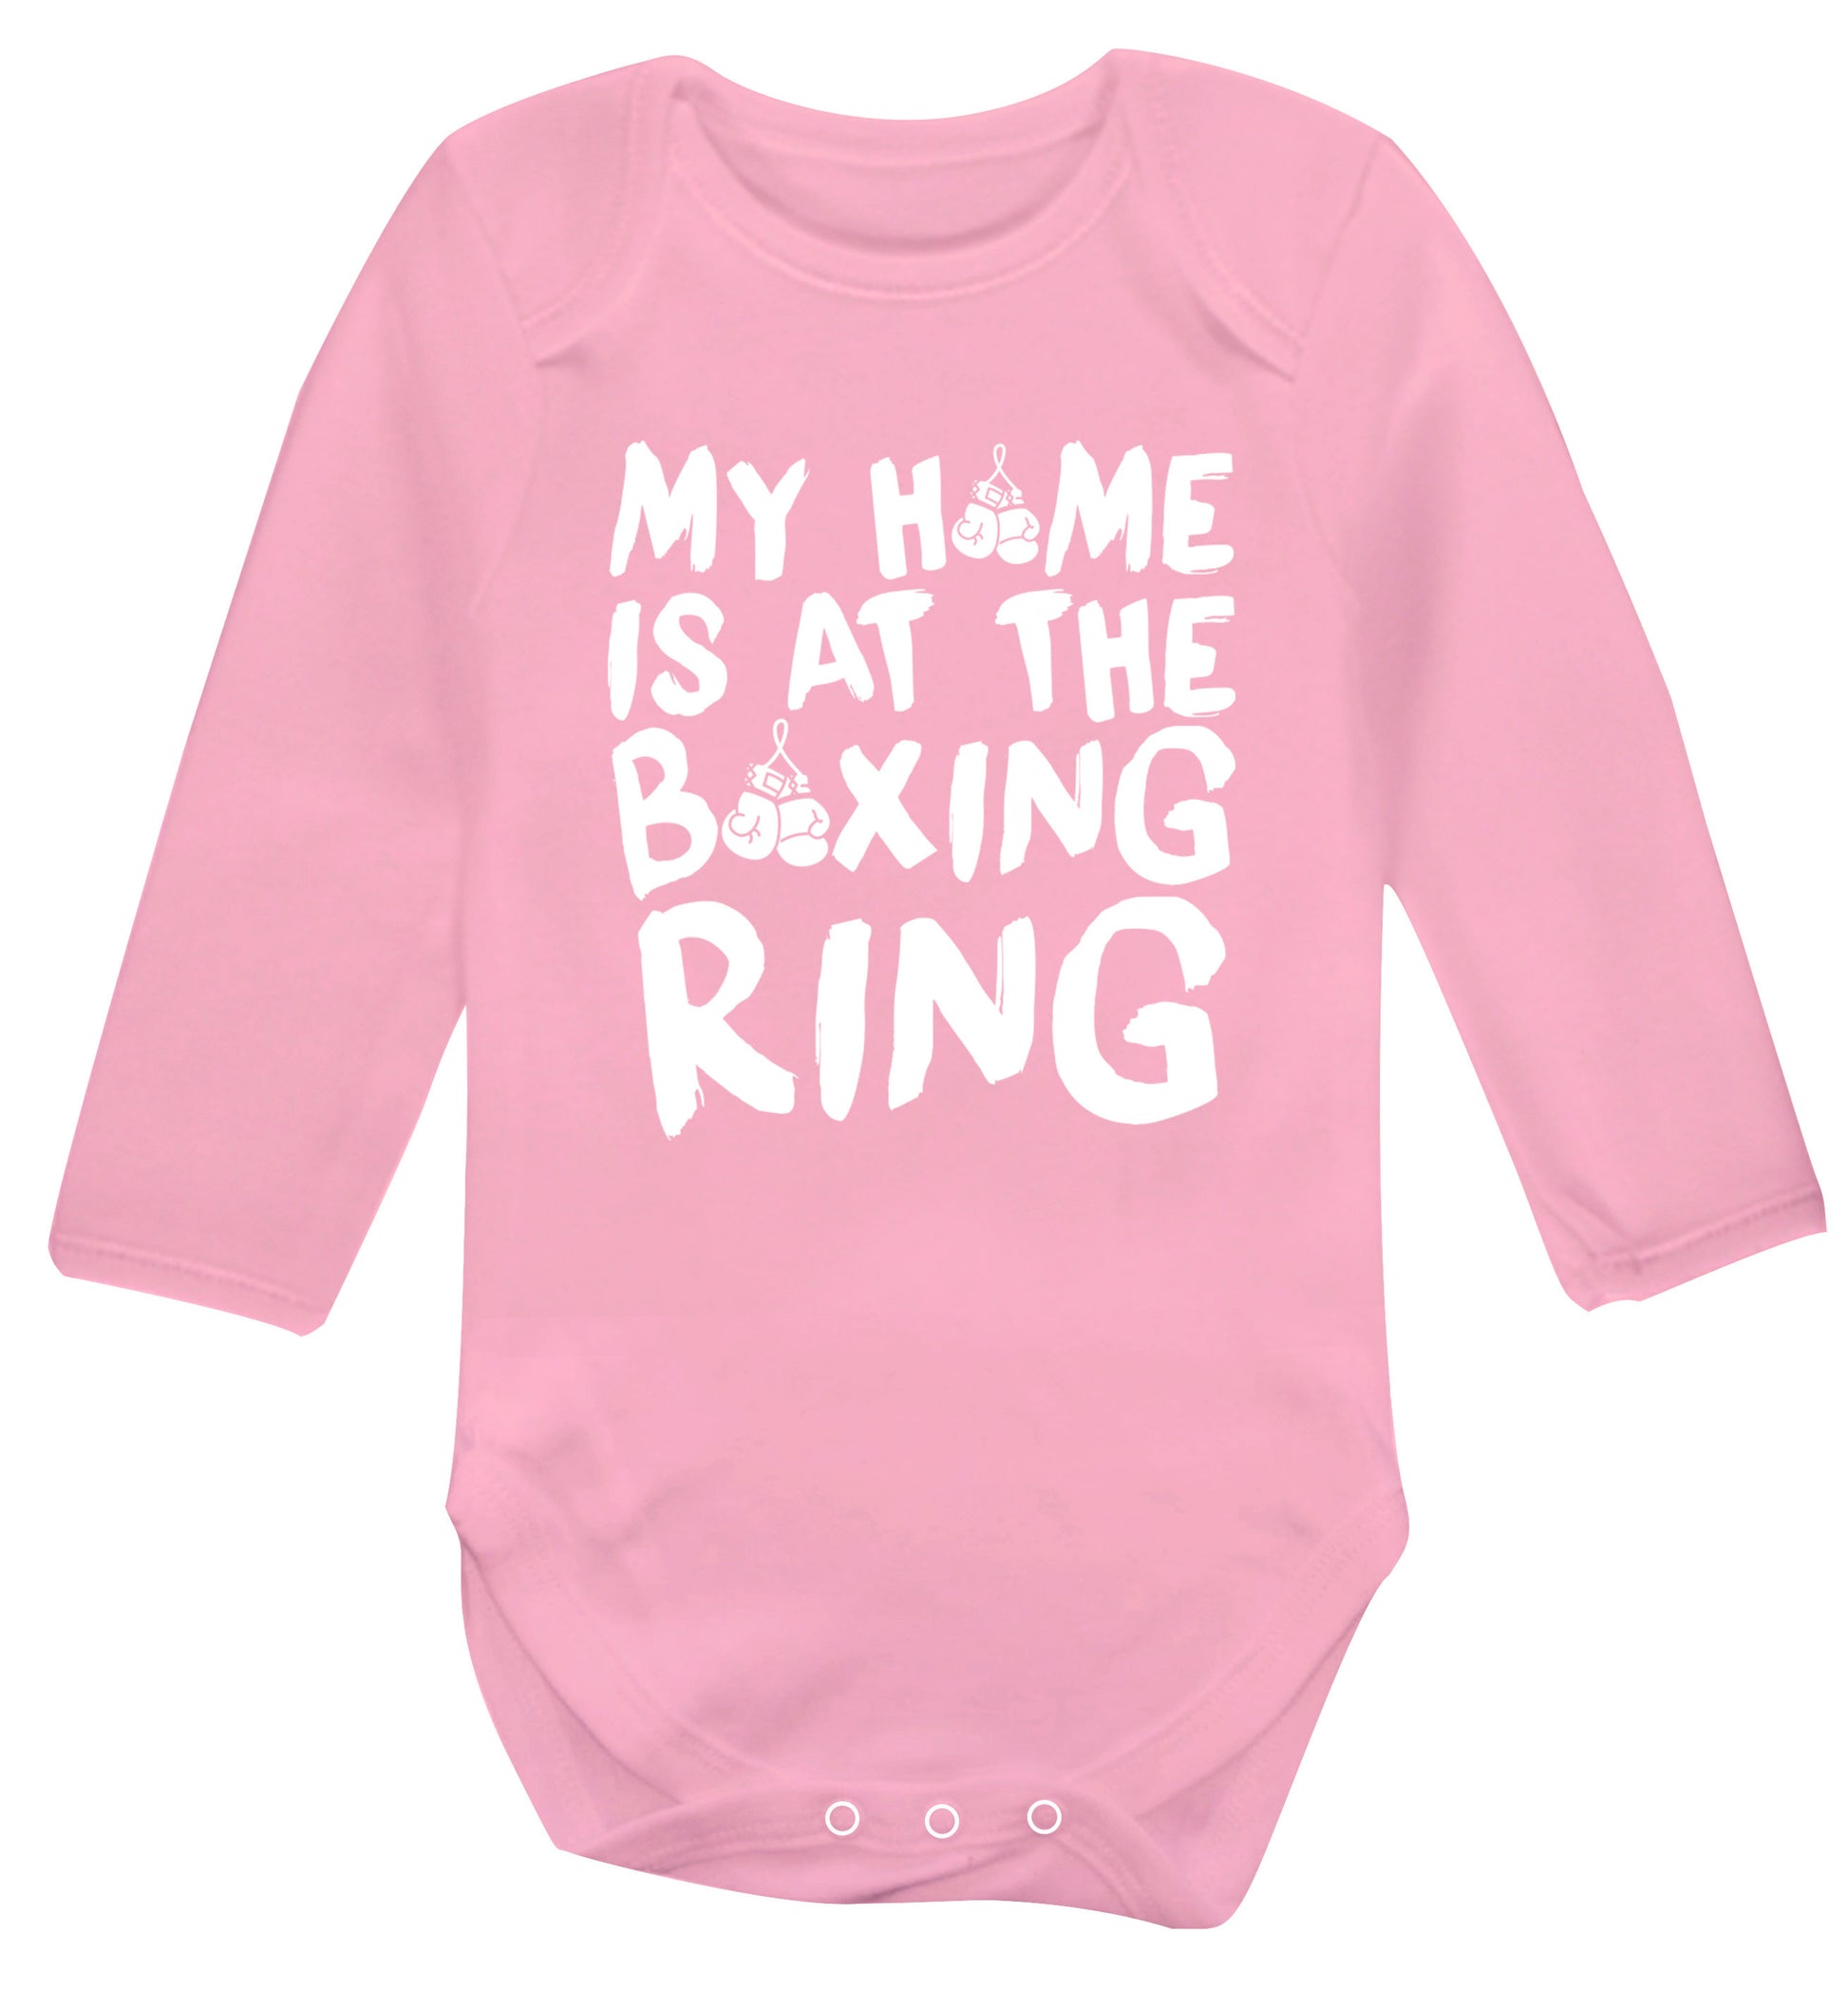 My home is at the boxing ring Baby Vest long sleeved pale pink 6-12 months